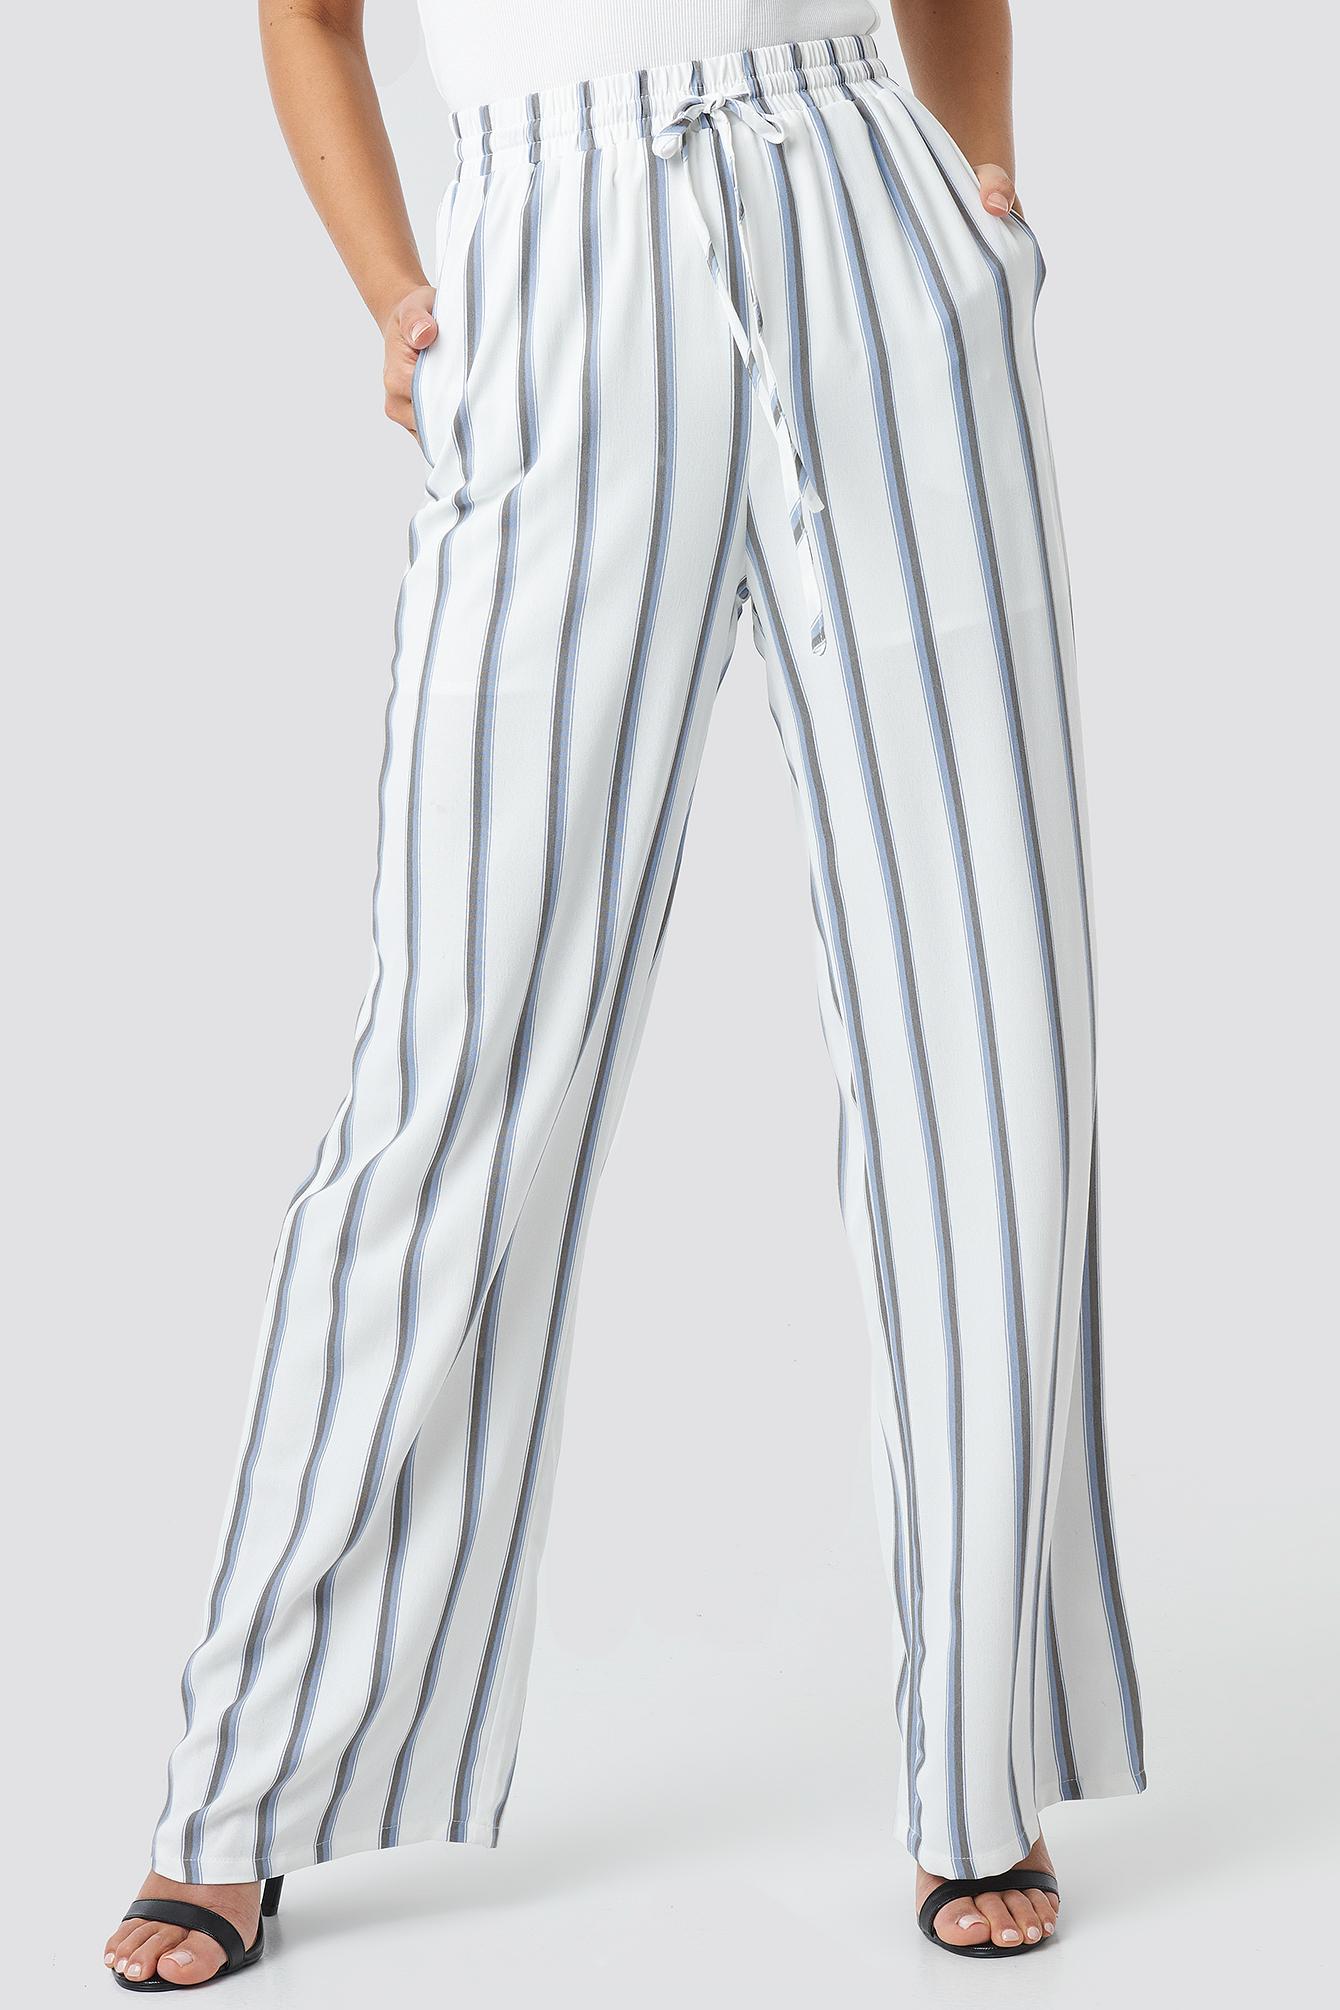 Glamorous Synthetic Striped Wide Pants Multicolor in White Blue Stripes ...